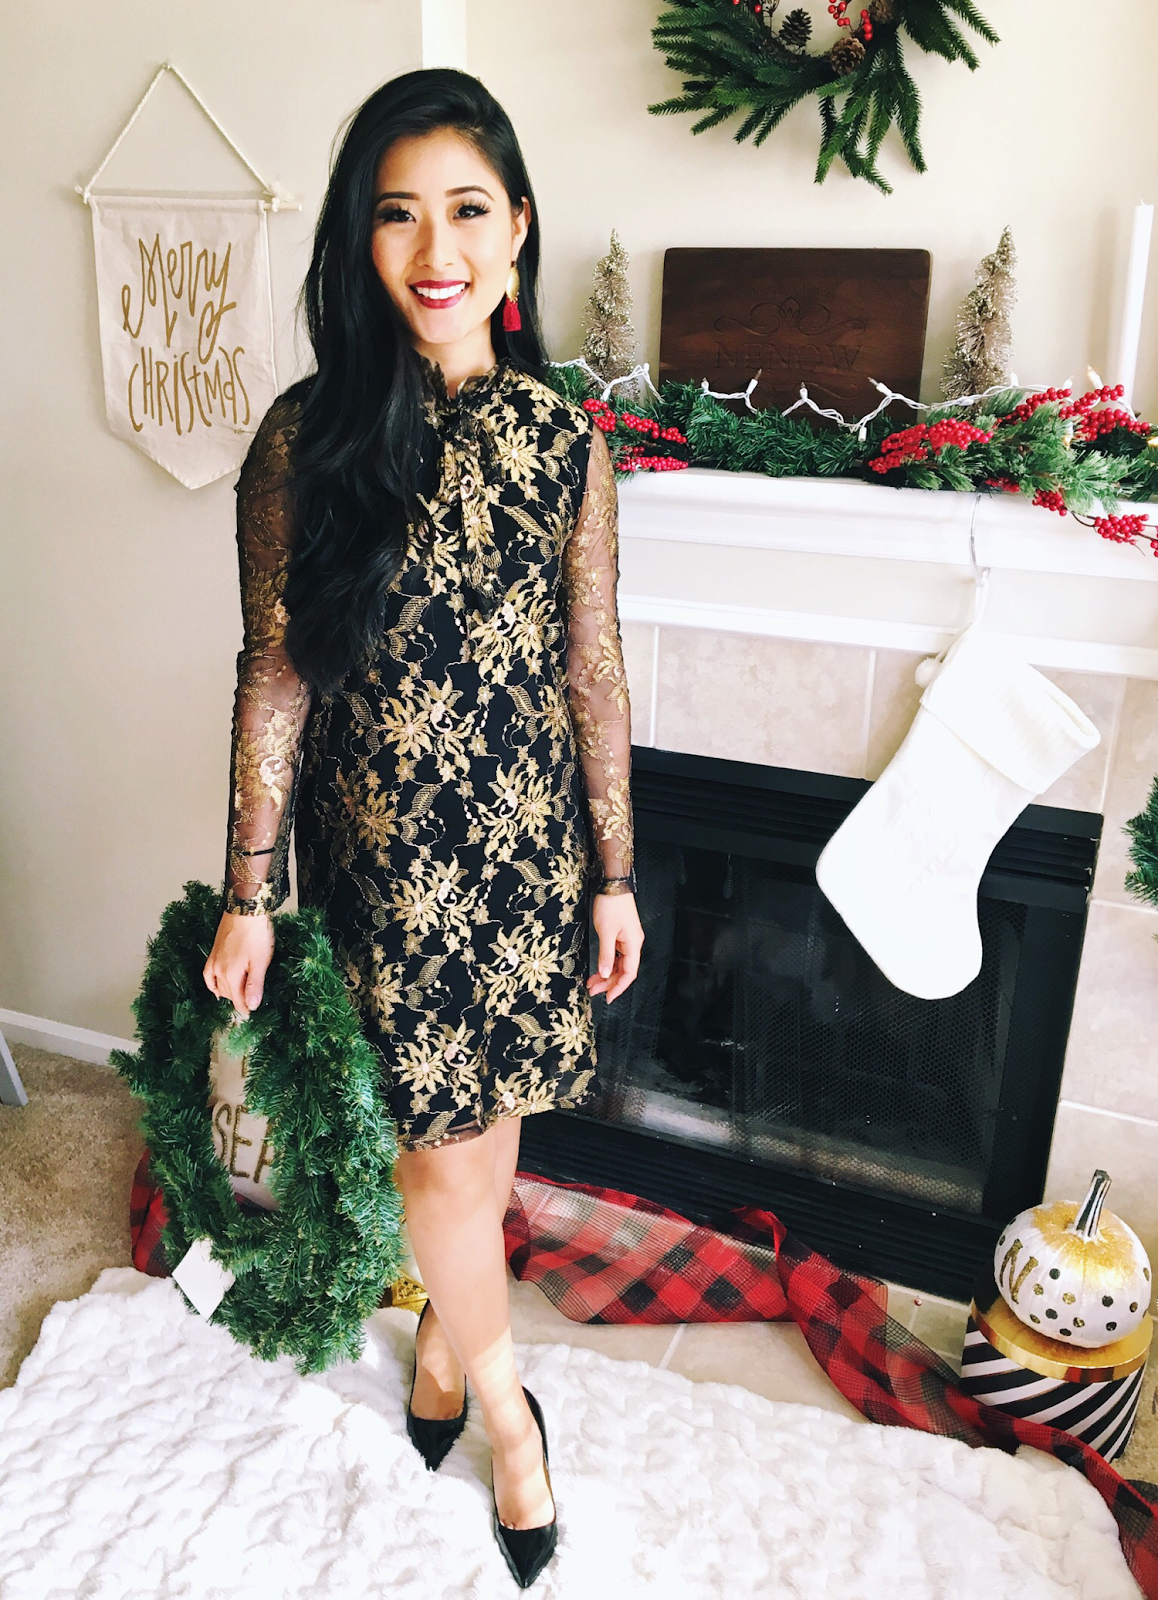 Jadoregrace.com // Glam Holiday Dress with Pink Blush